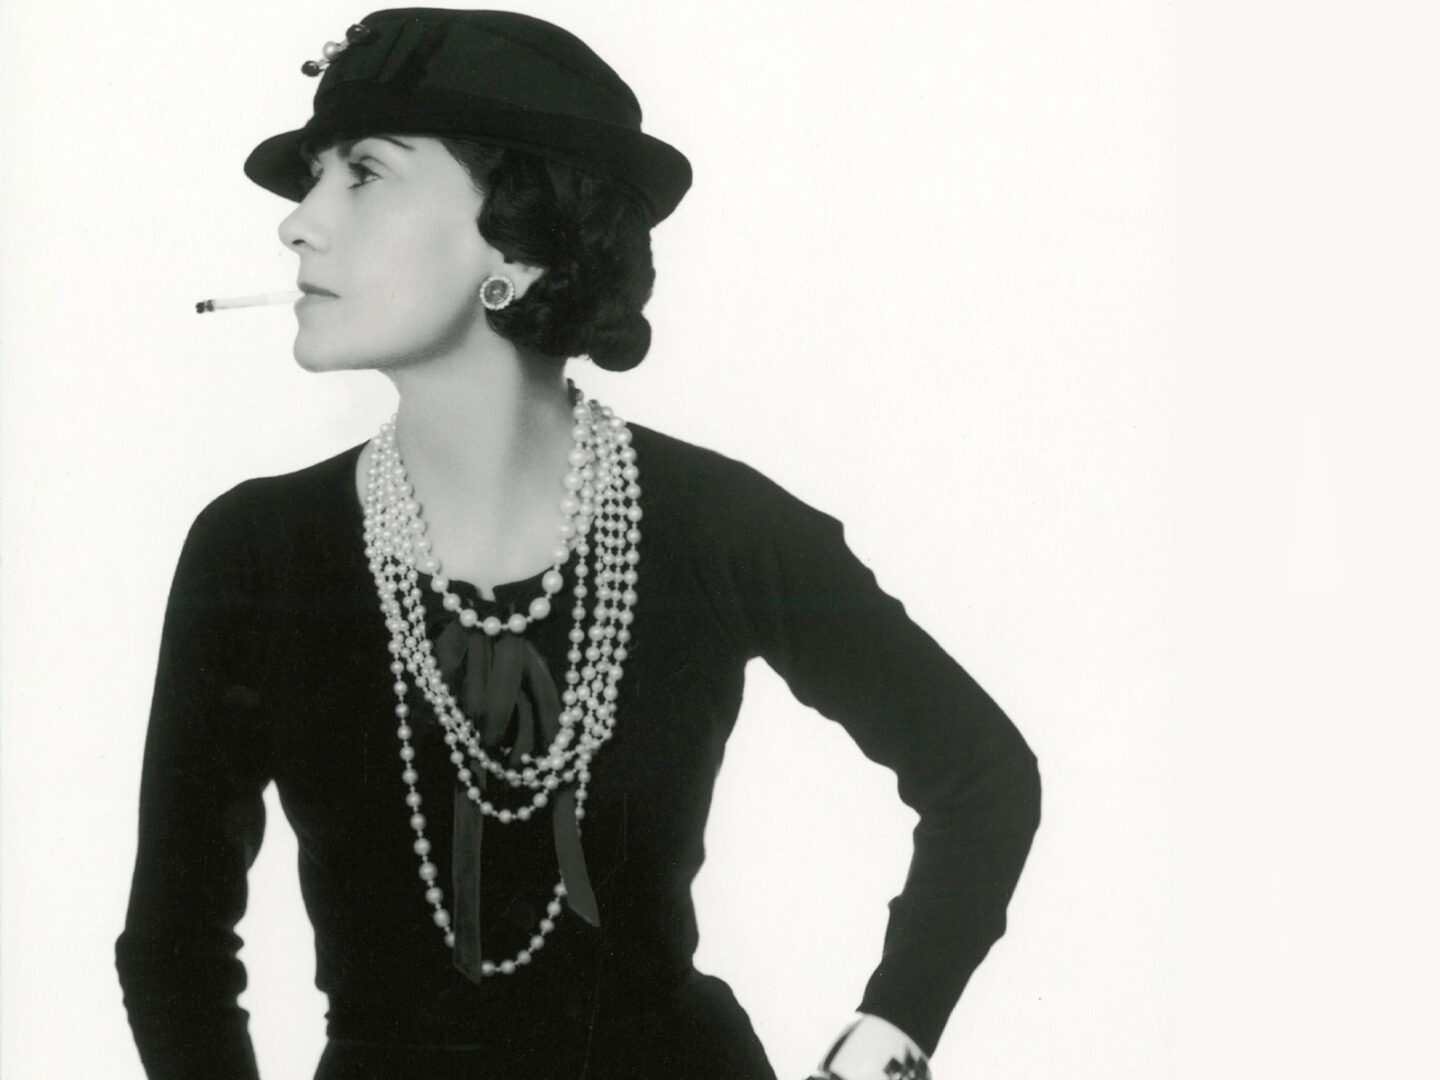 This exhibition pays tribute to the legacy of Gabrielle Coco Chanel